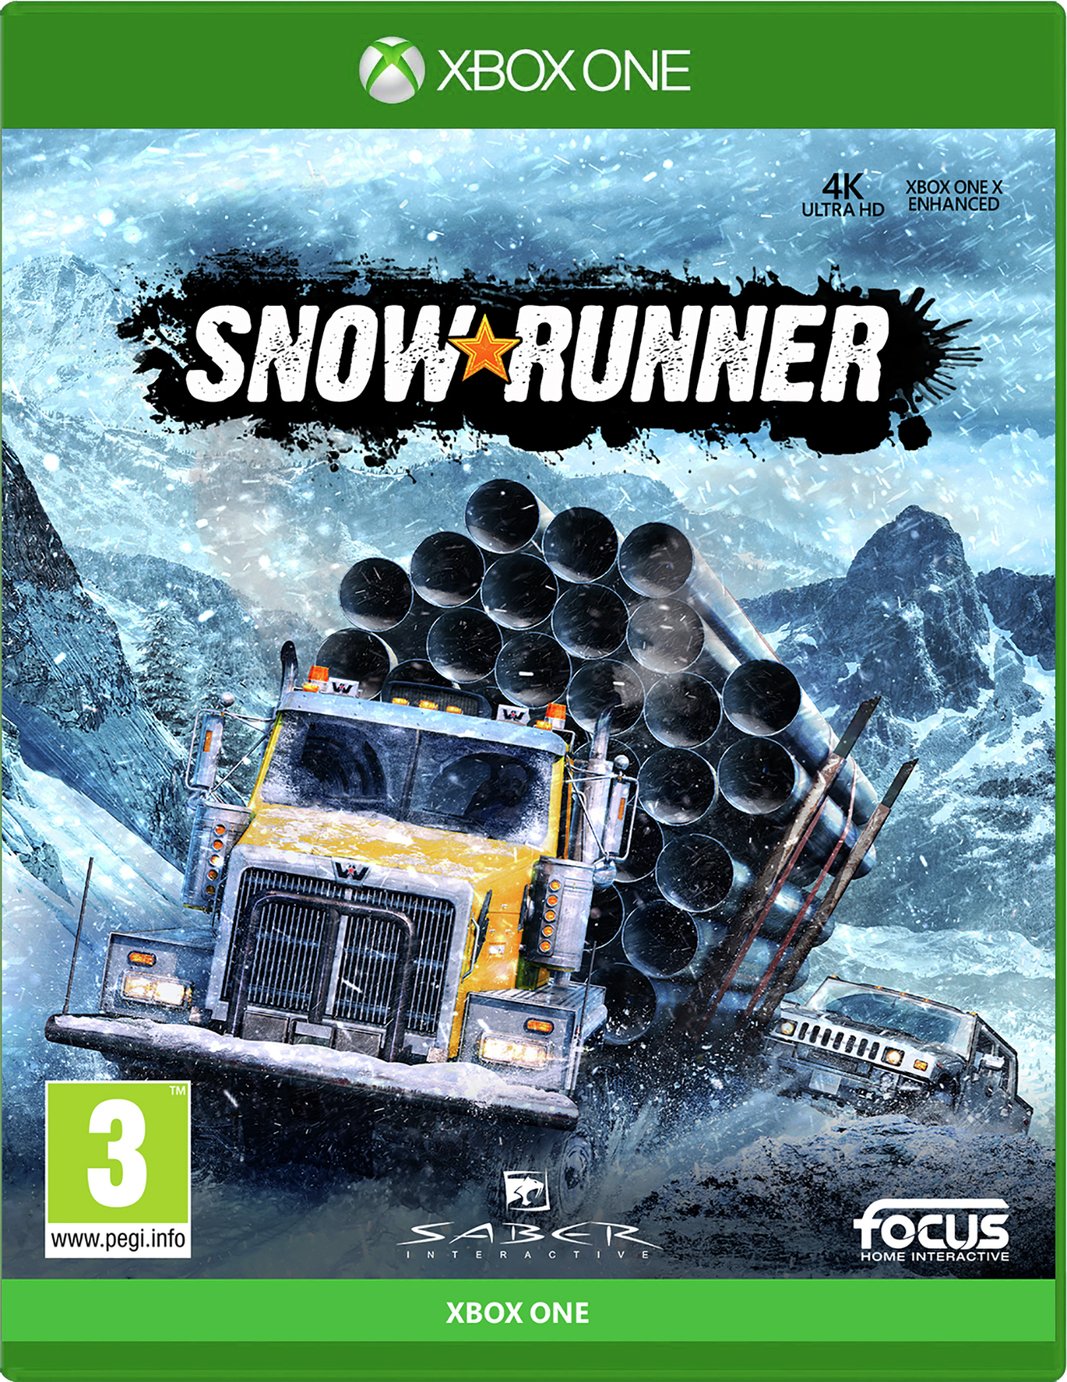 snow runner release date xbox